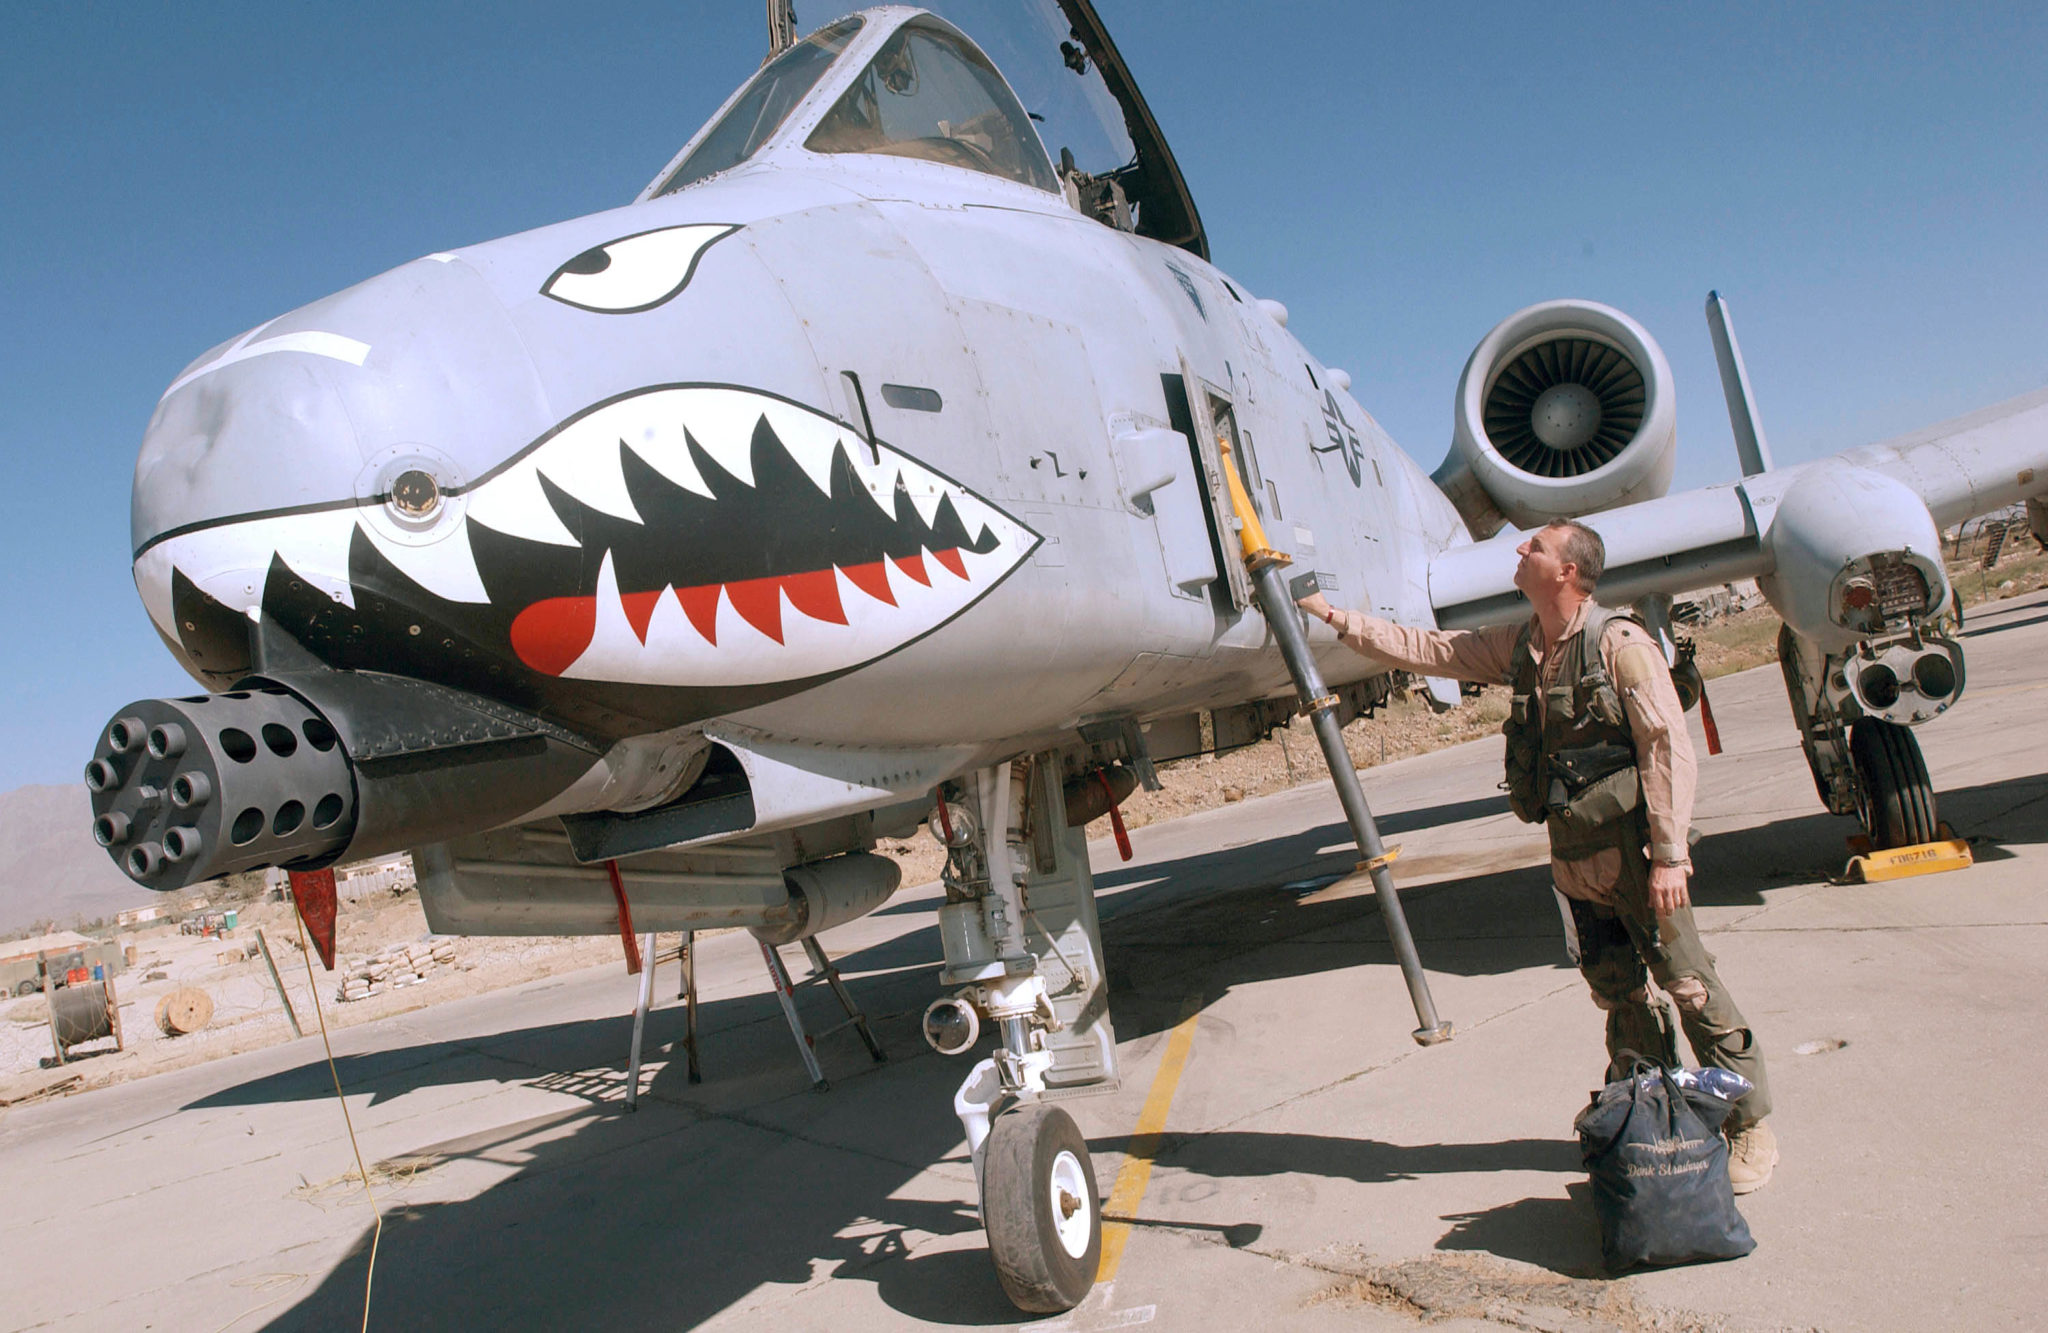 BAGRAM AIR FORCE BASE, AFGHANISTAN - SEPTEMBER 5:  Tim, a Lt. Colonel in the U.S. Air Force, checks the exterior of his A-10 Thunderbolt II attack aircraft, known as the 